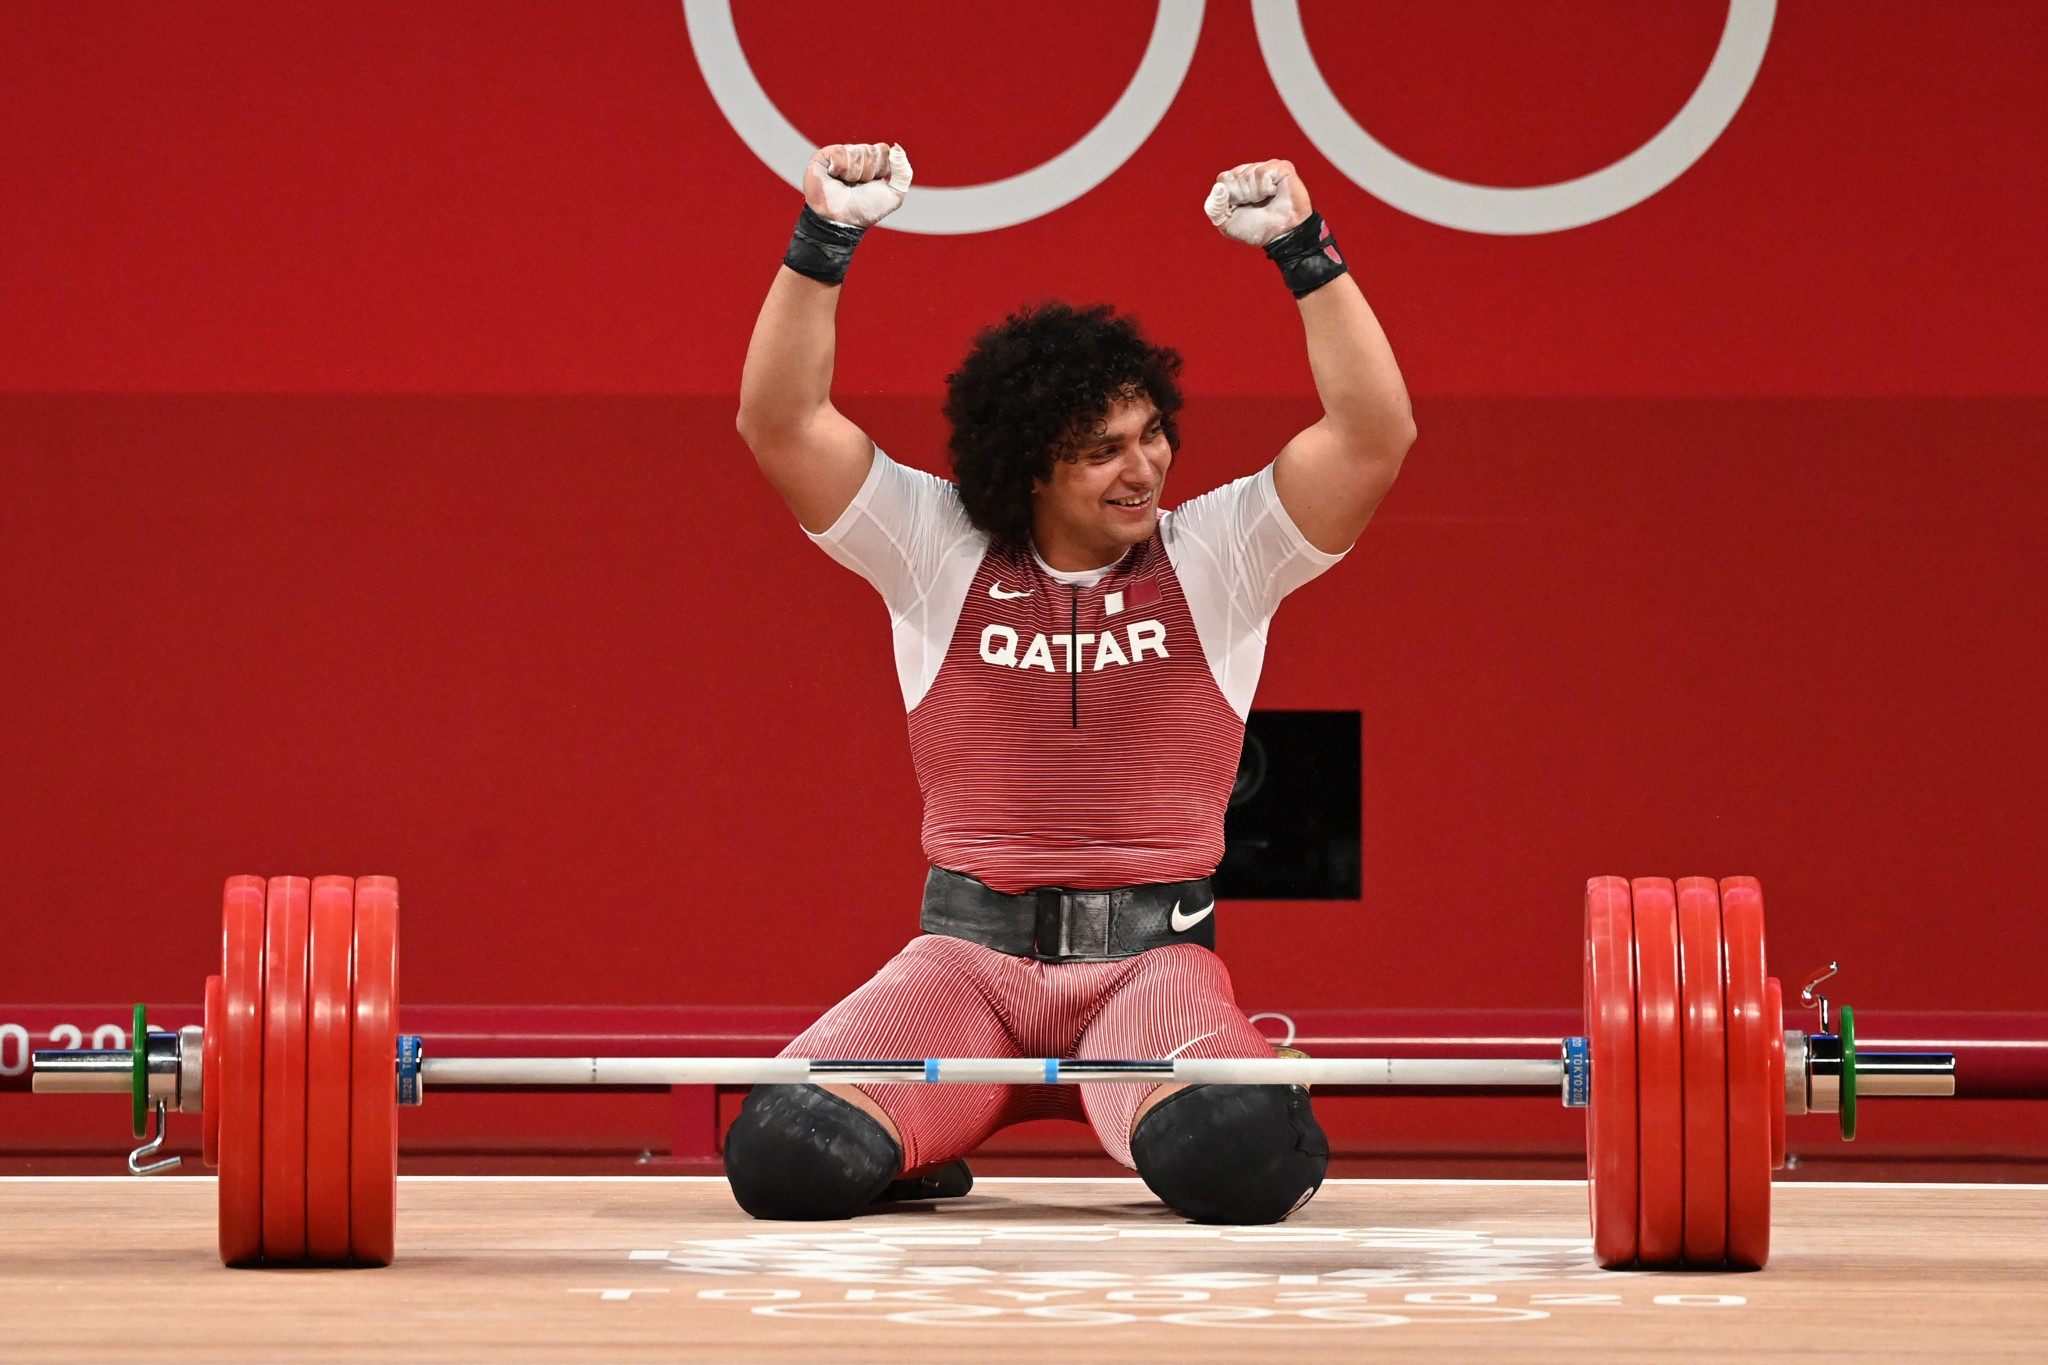 Meso Hassona of Qatar is the sole Olympic gold medallist competing in Bahrain ©Getty Images